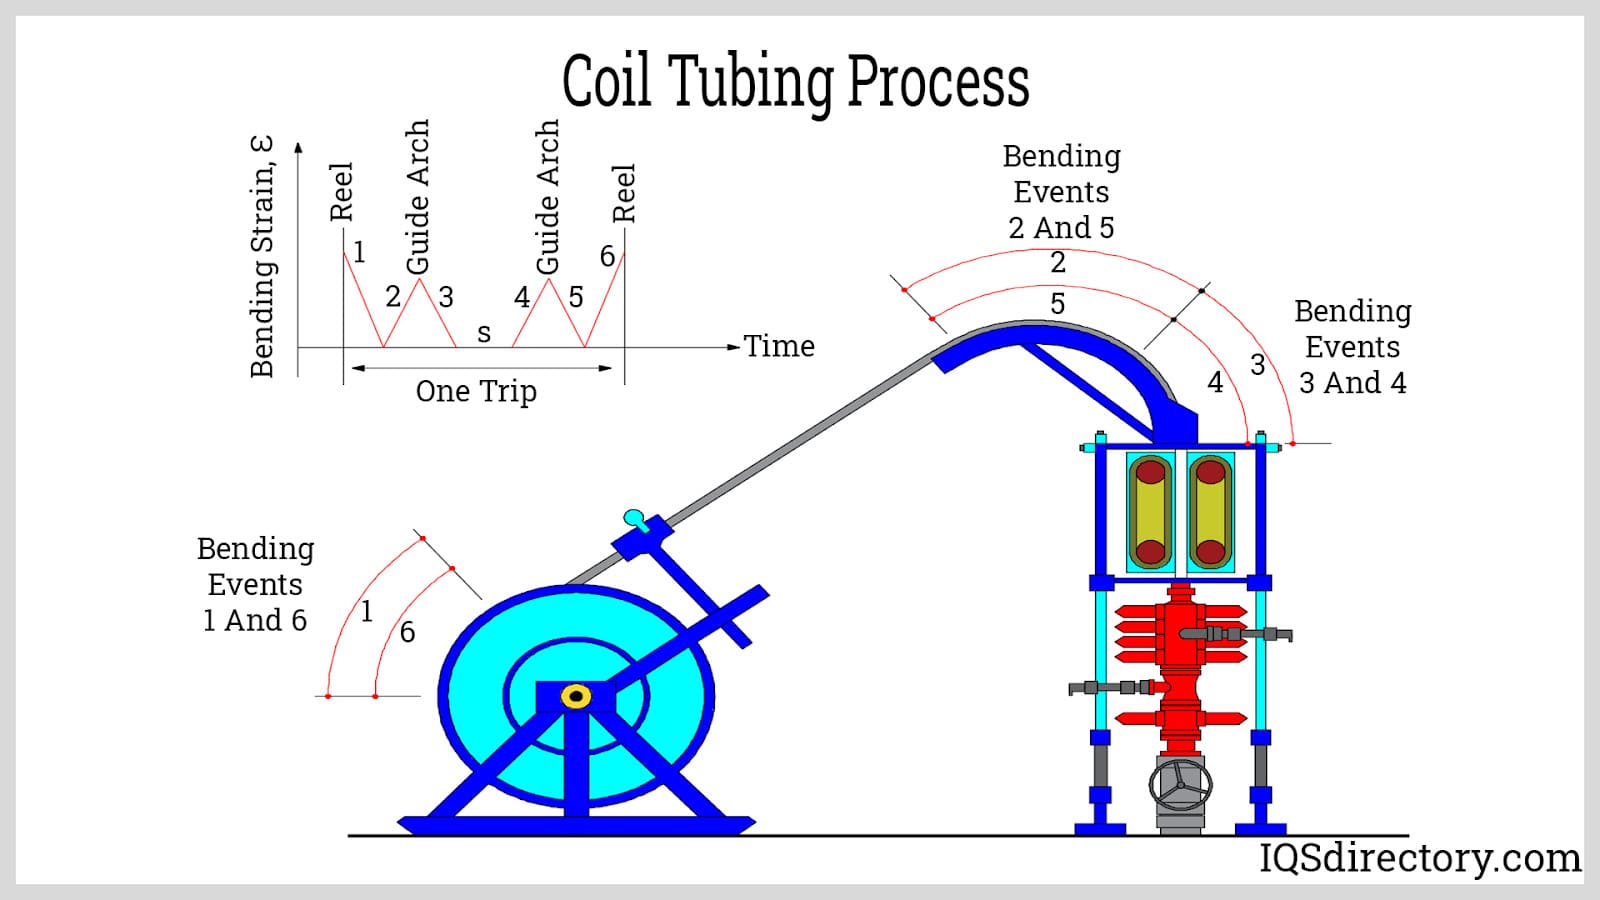 Coil Tubing Process